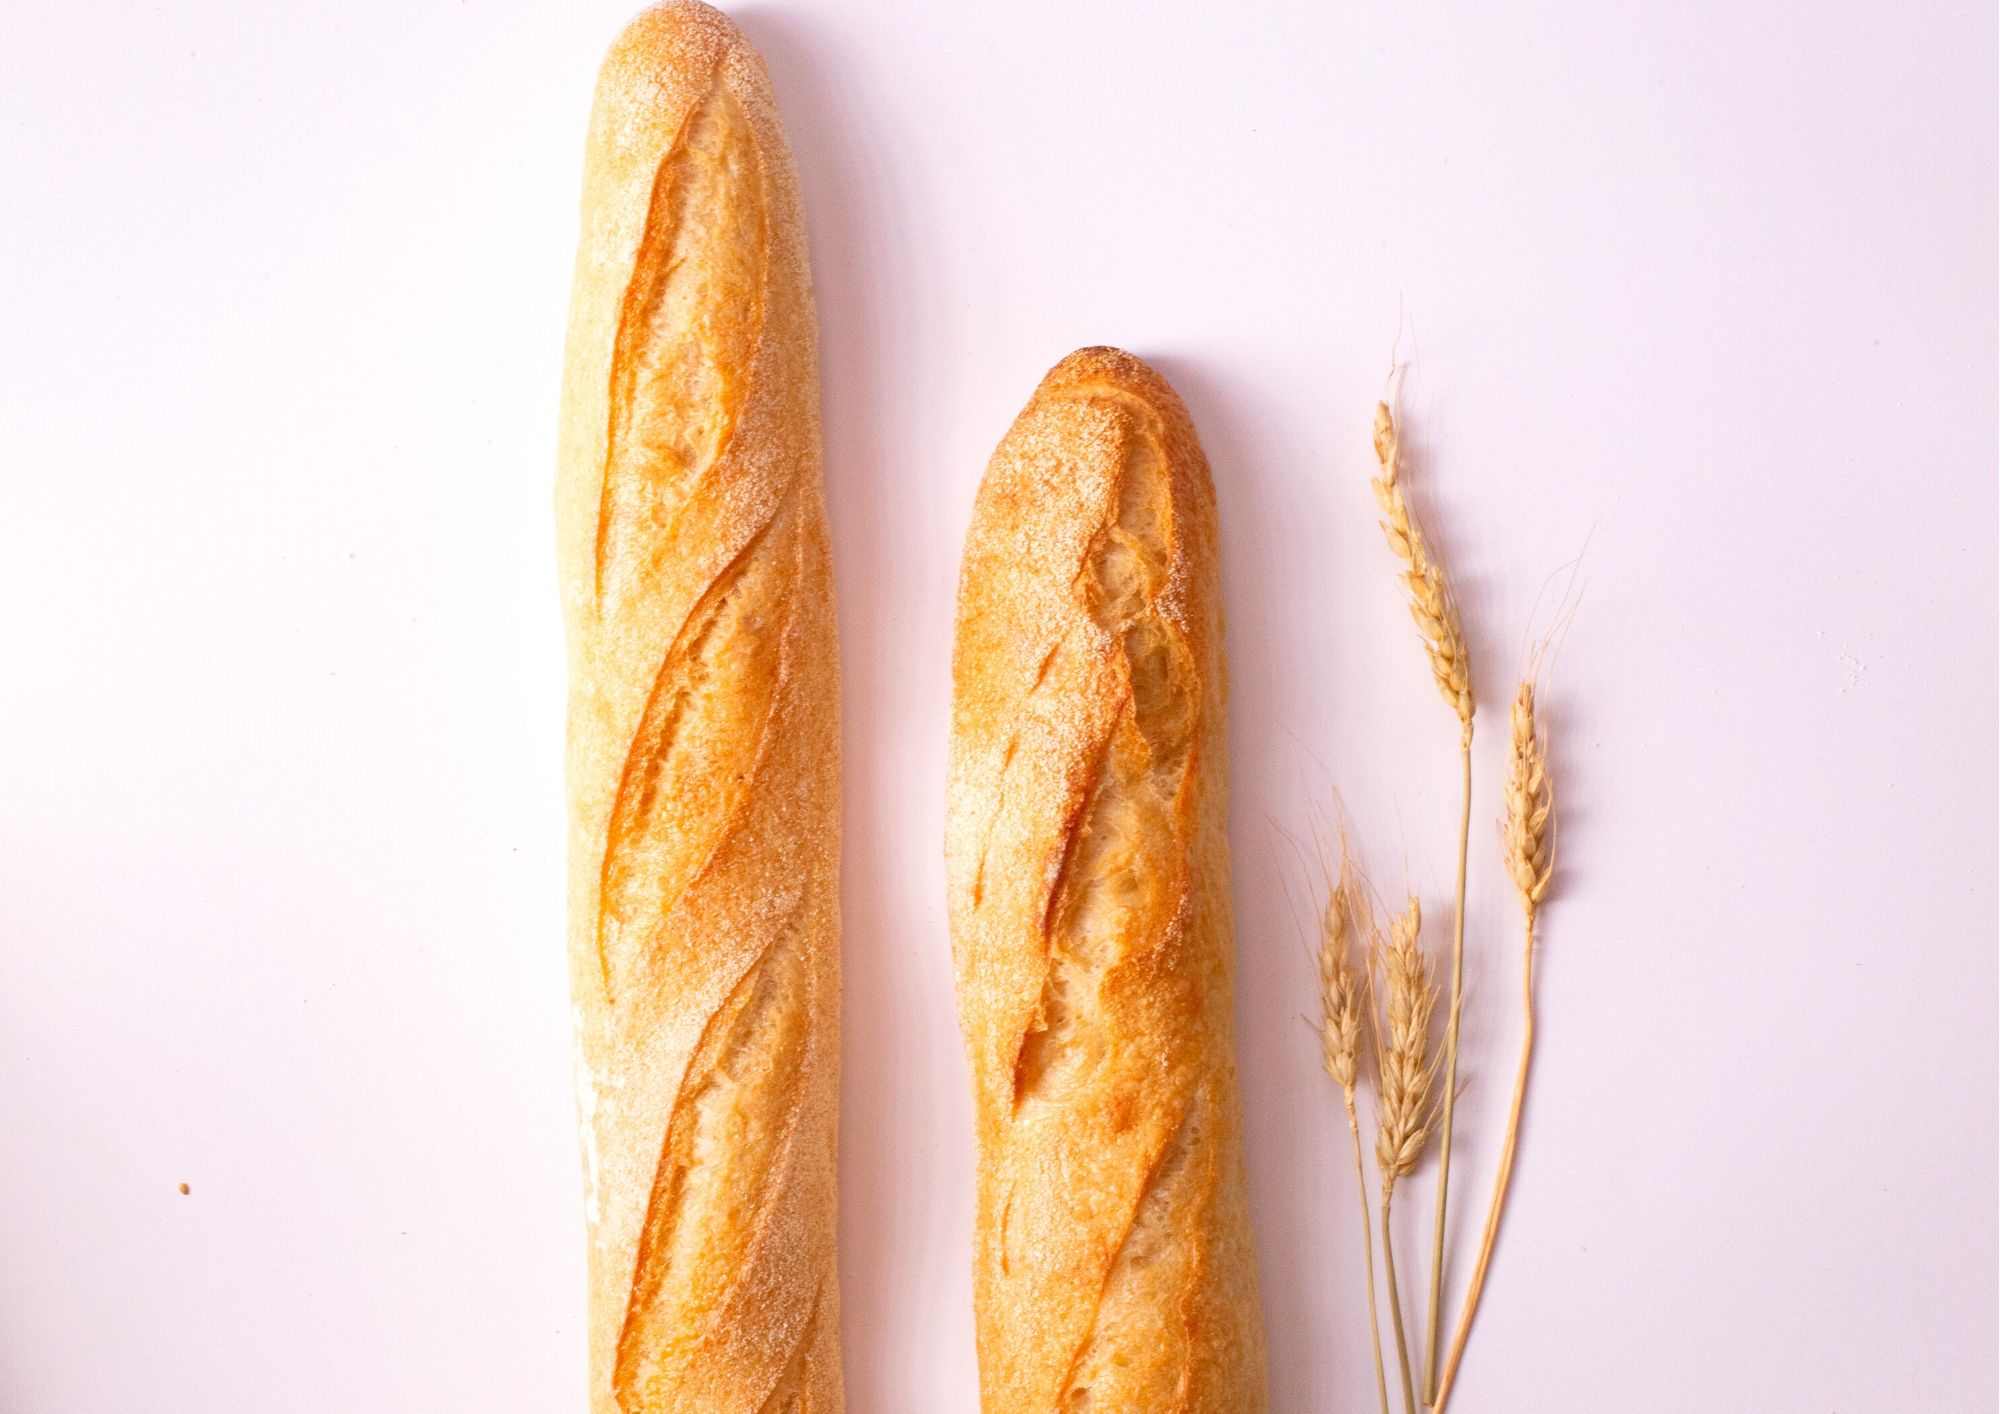 10 signs you're gluten intolerant